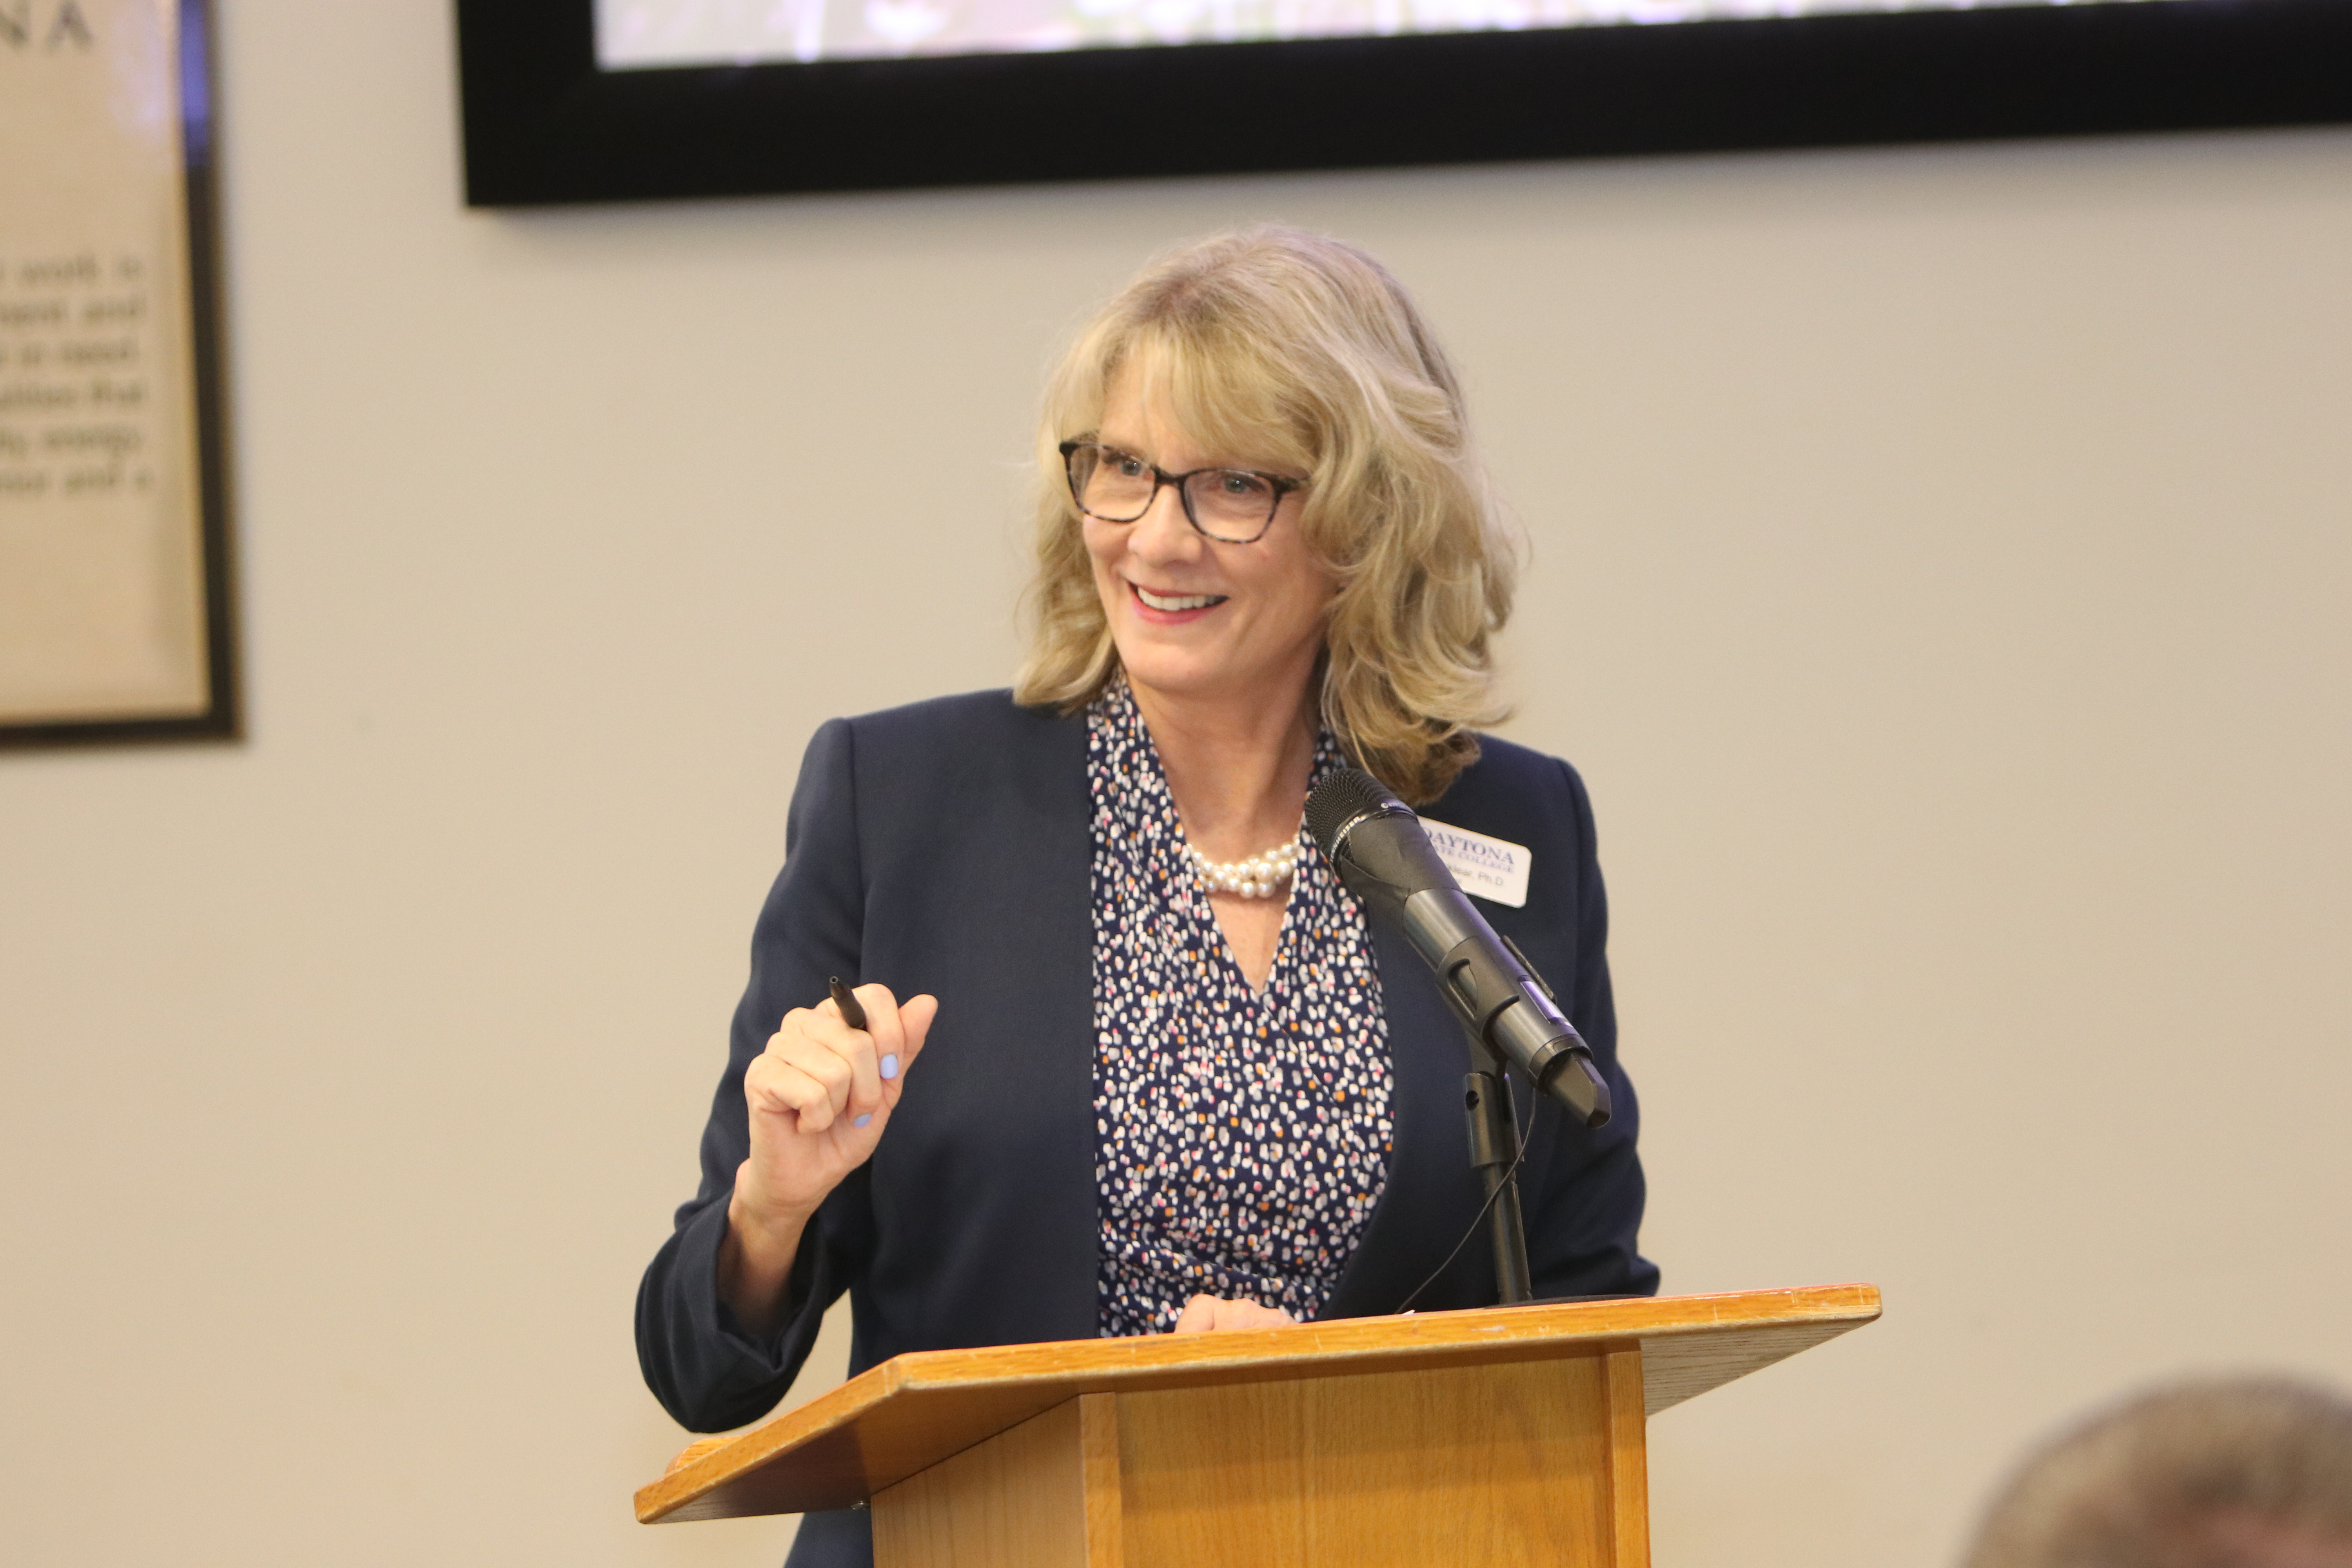 Daytona State College Provost Dr. Amy Locklear